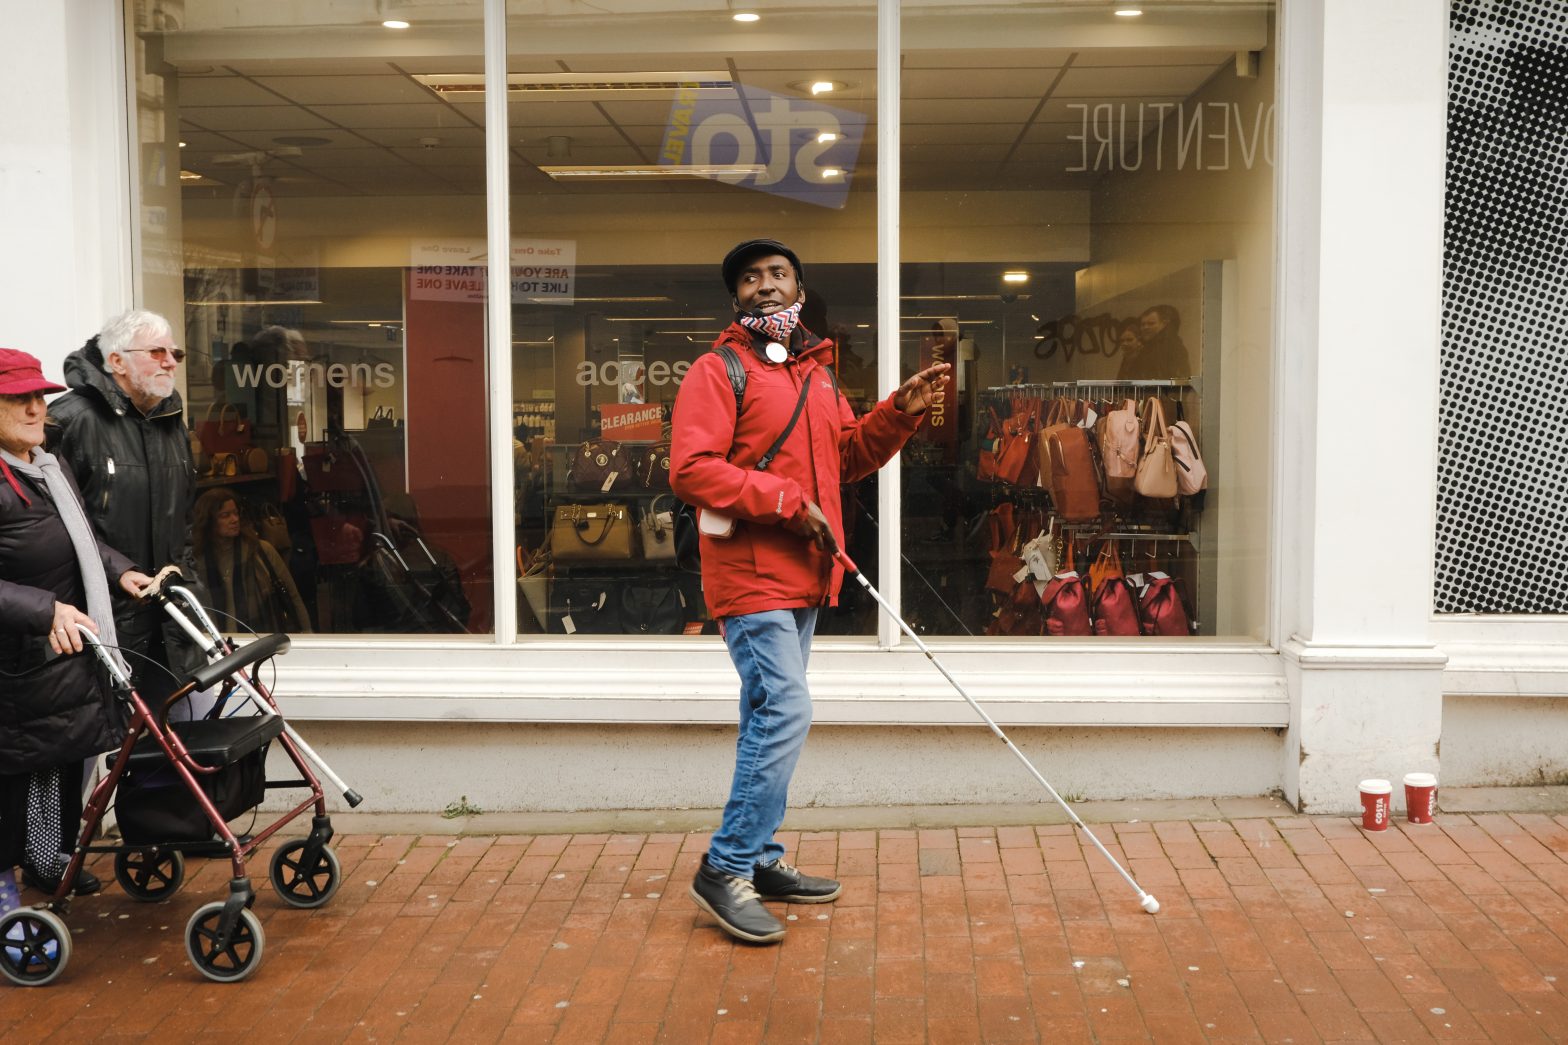 A man is walking past a shop using his cane. He is wearing blue jeans and a bright red jacket.